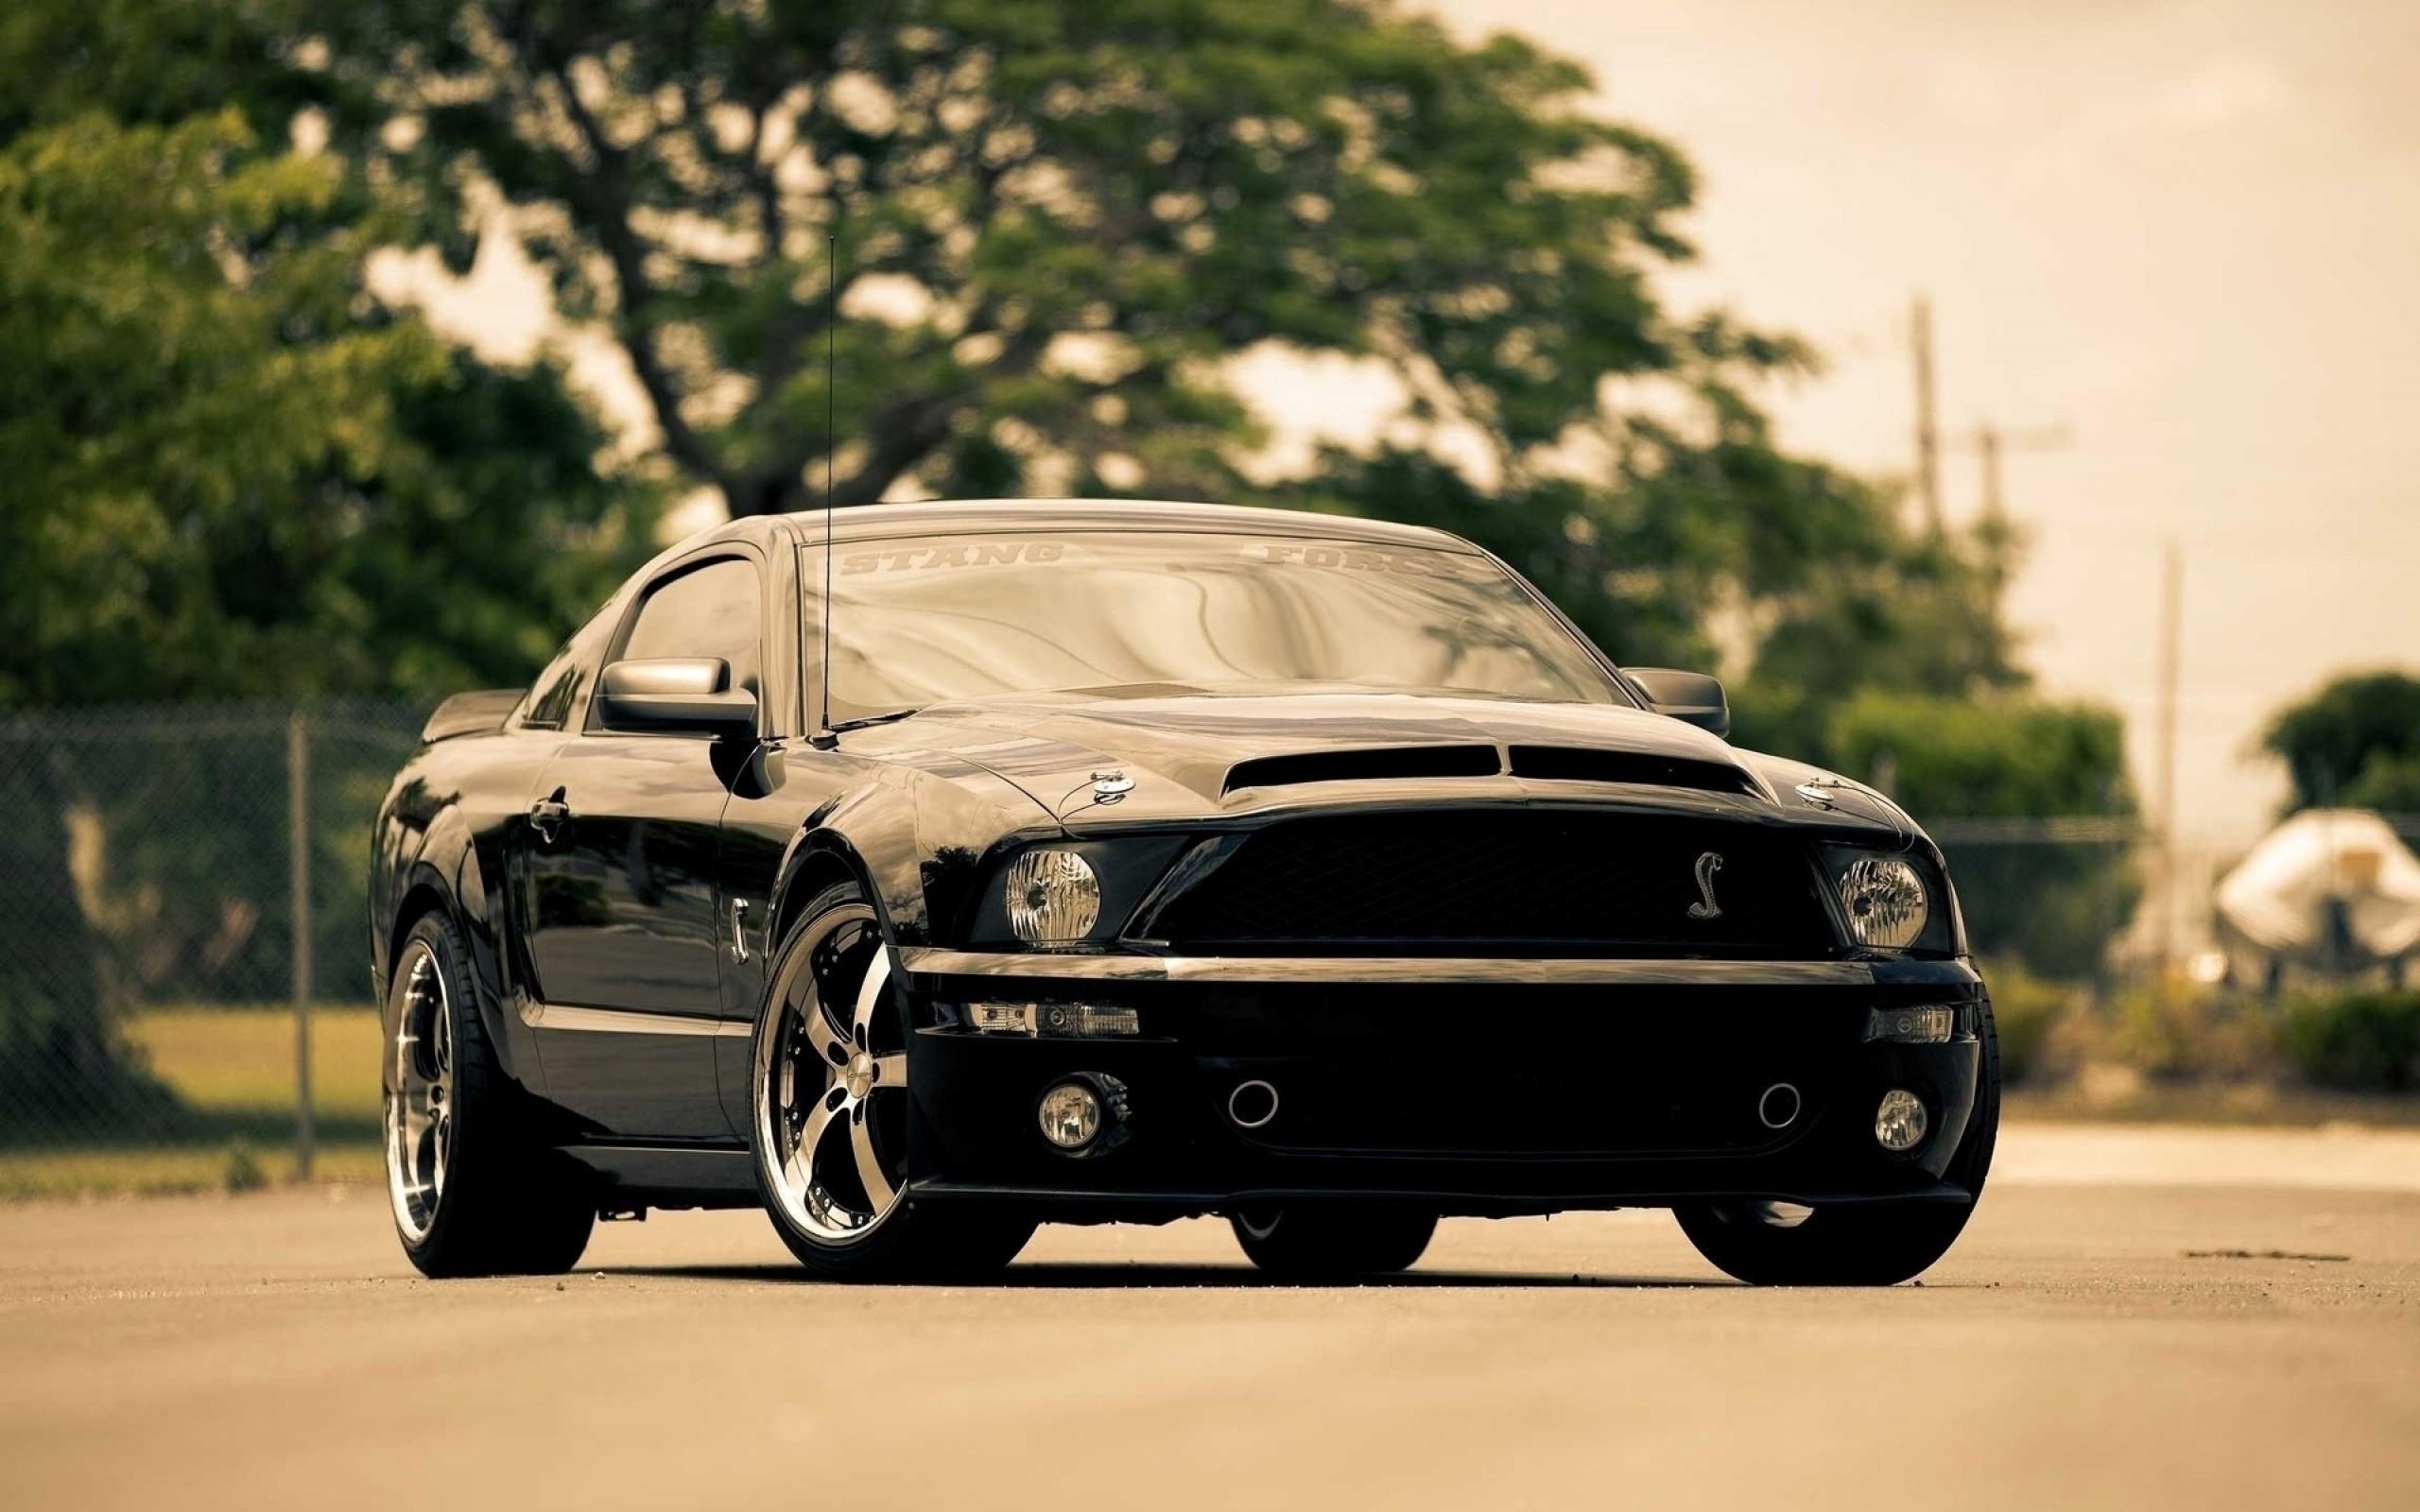 cars, photography, muscle cars, vehicles, Ford Mustang, Knight Rider